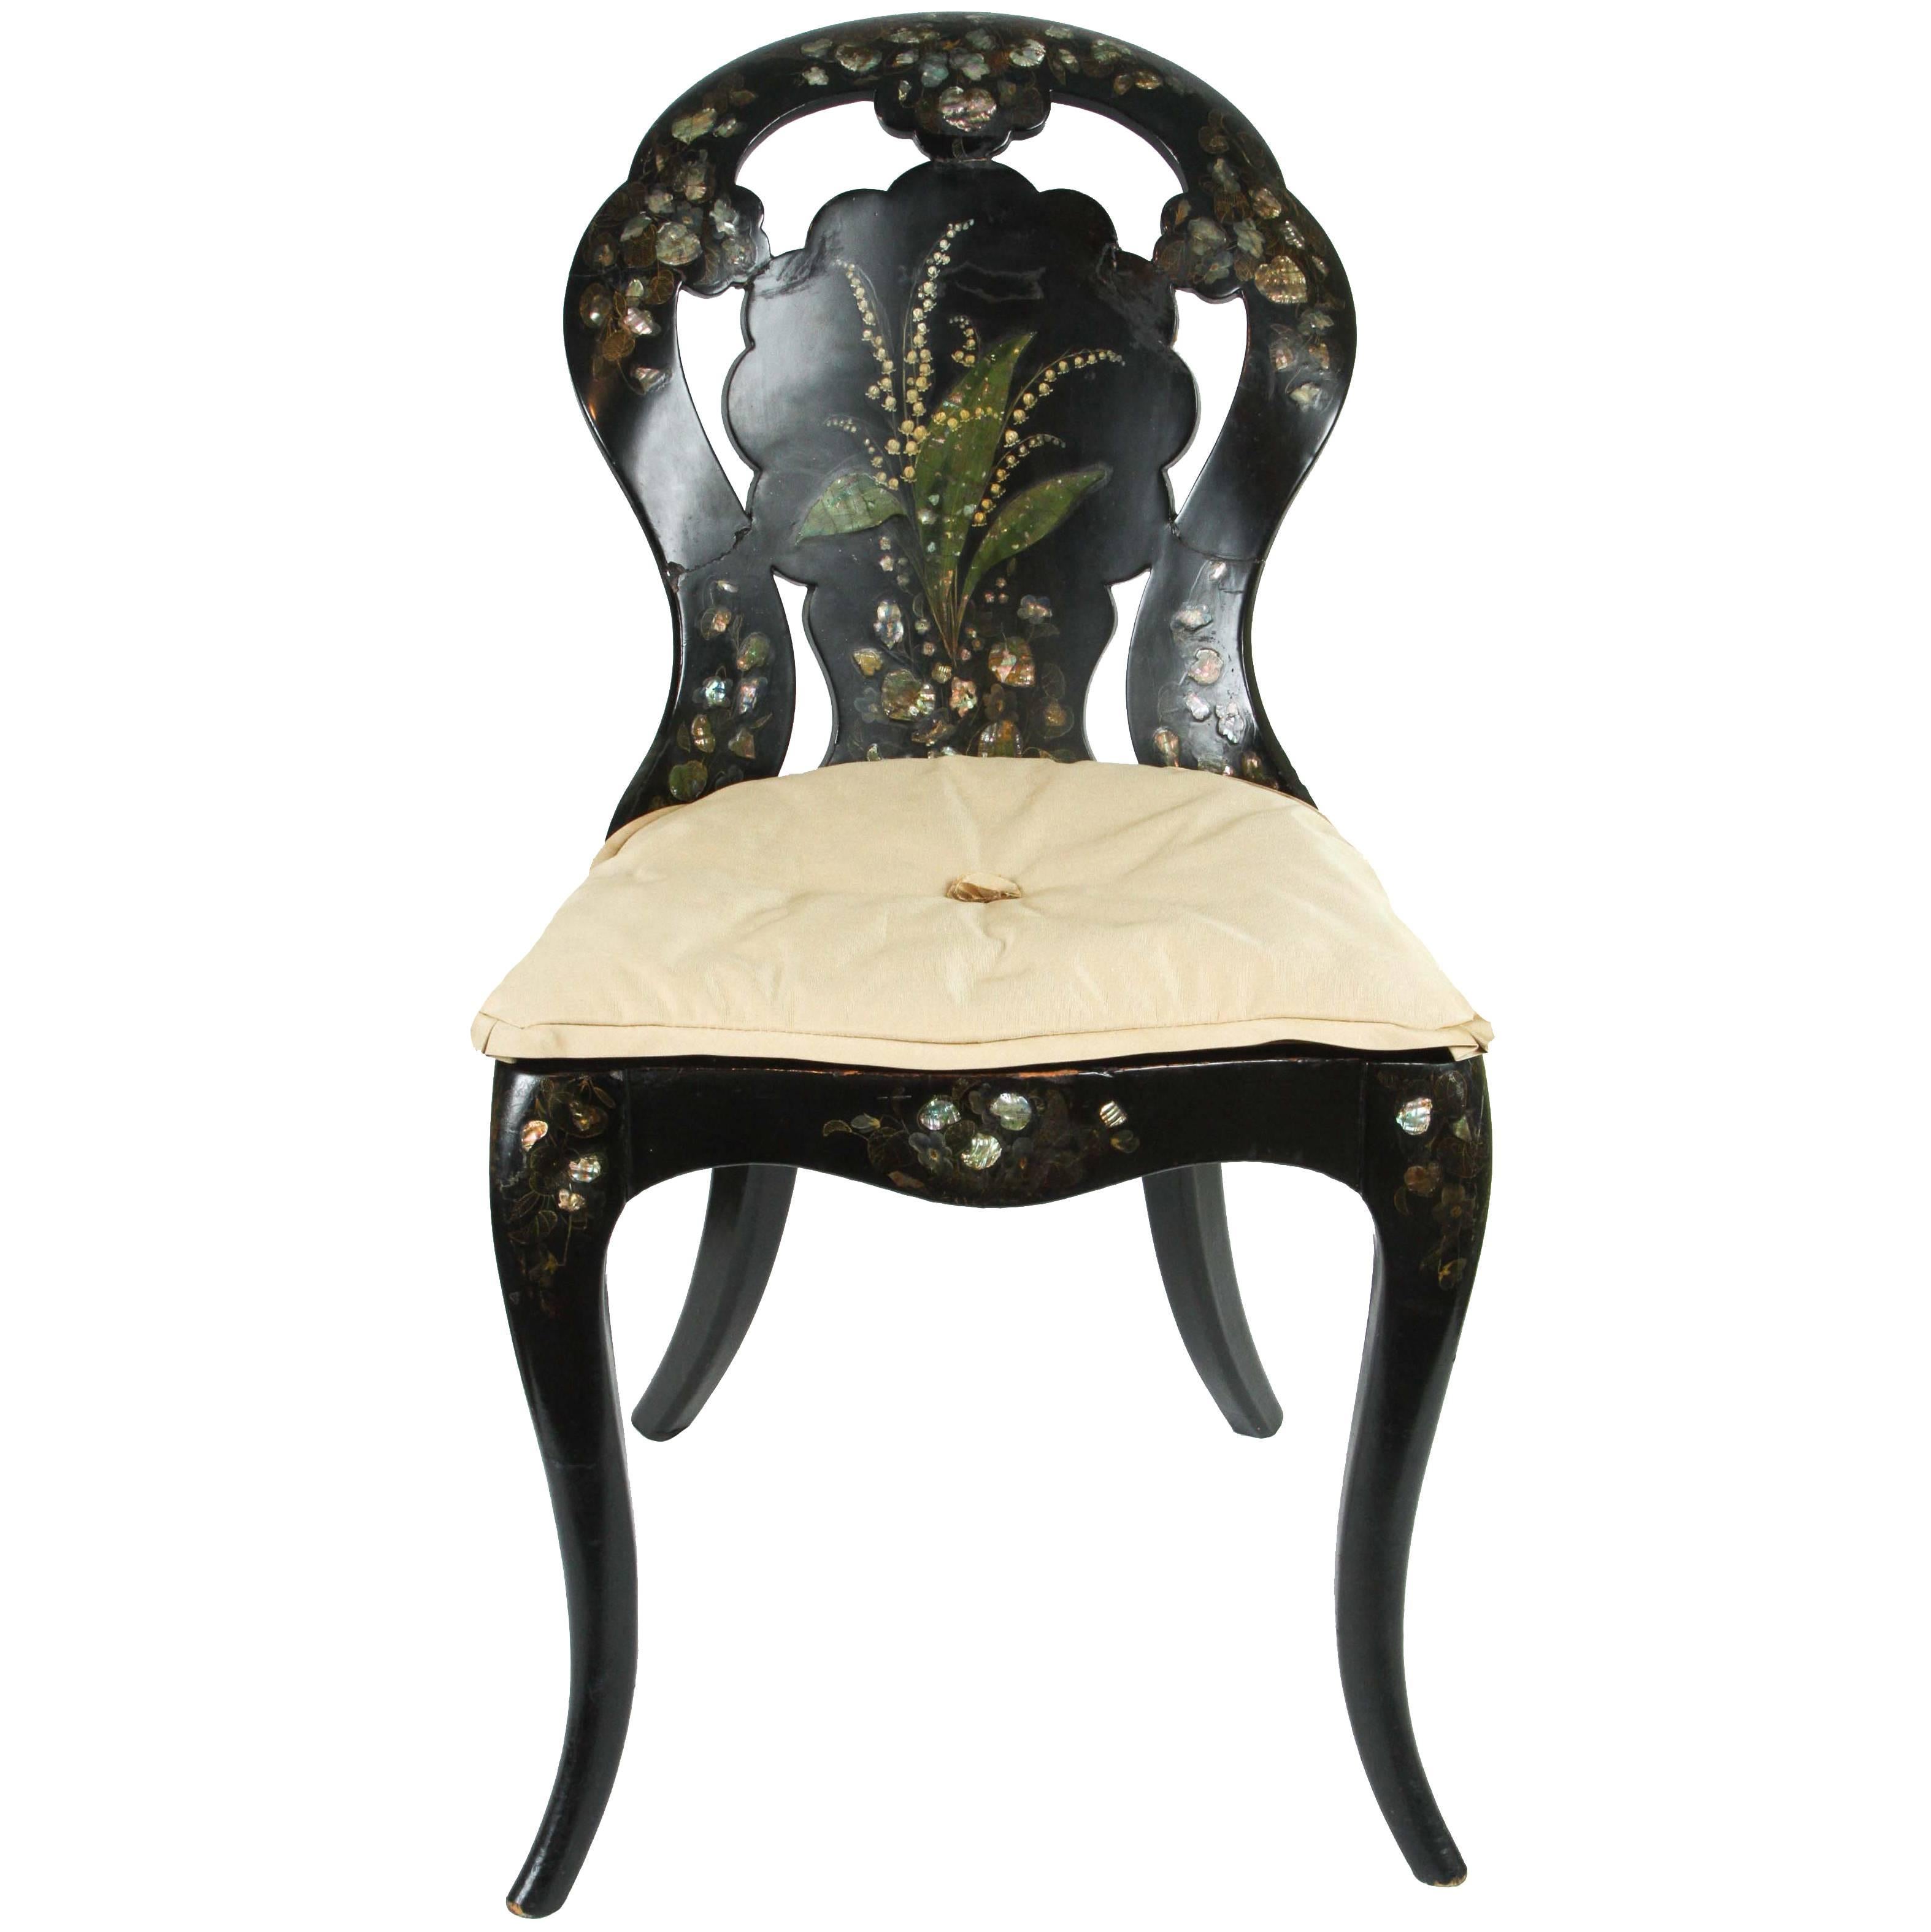 A Papier-Mache Chair in Black Lacquer with Mother of Pearl Inlay, circa 1850